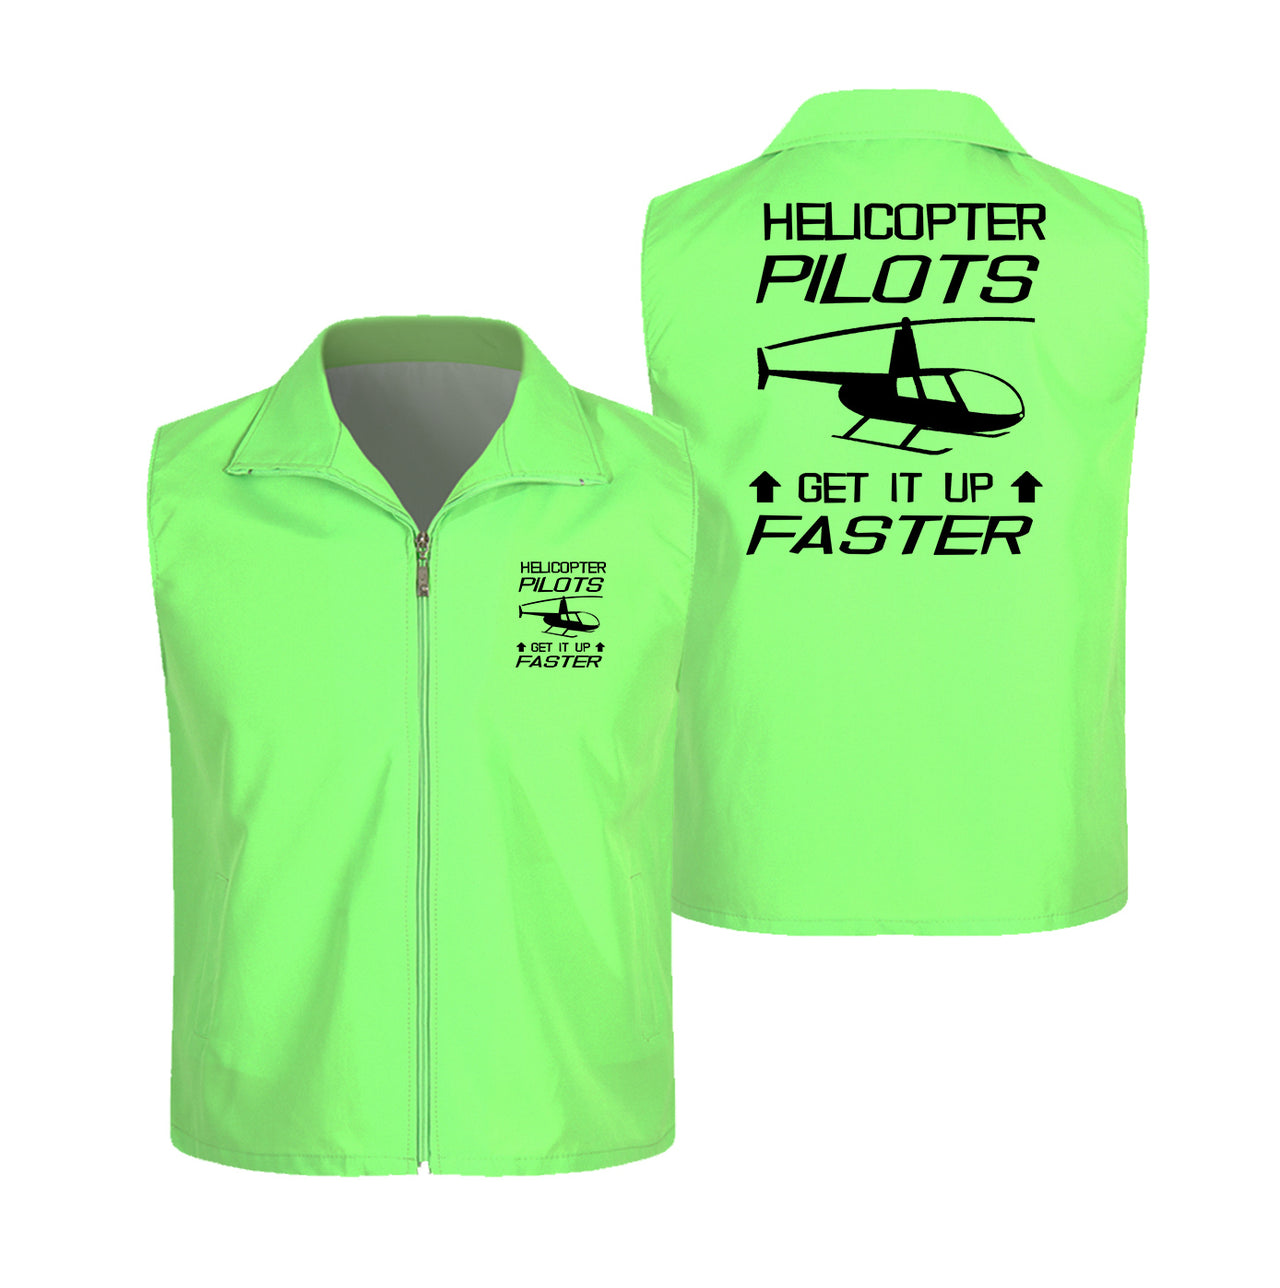 Helicopter Pilots Get It Up Faster Designed Thin Style Vests